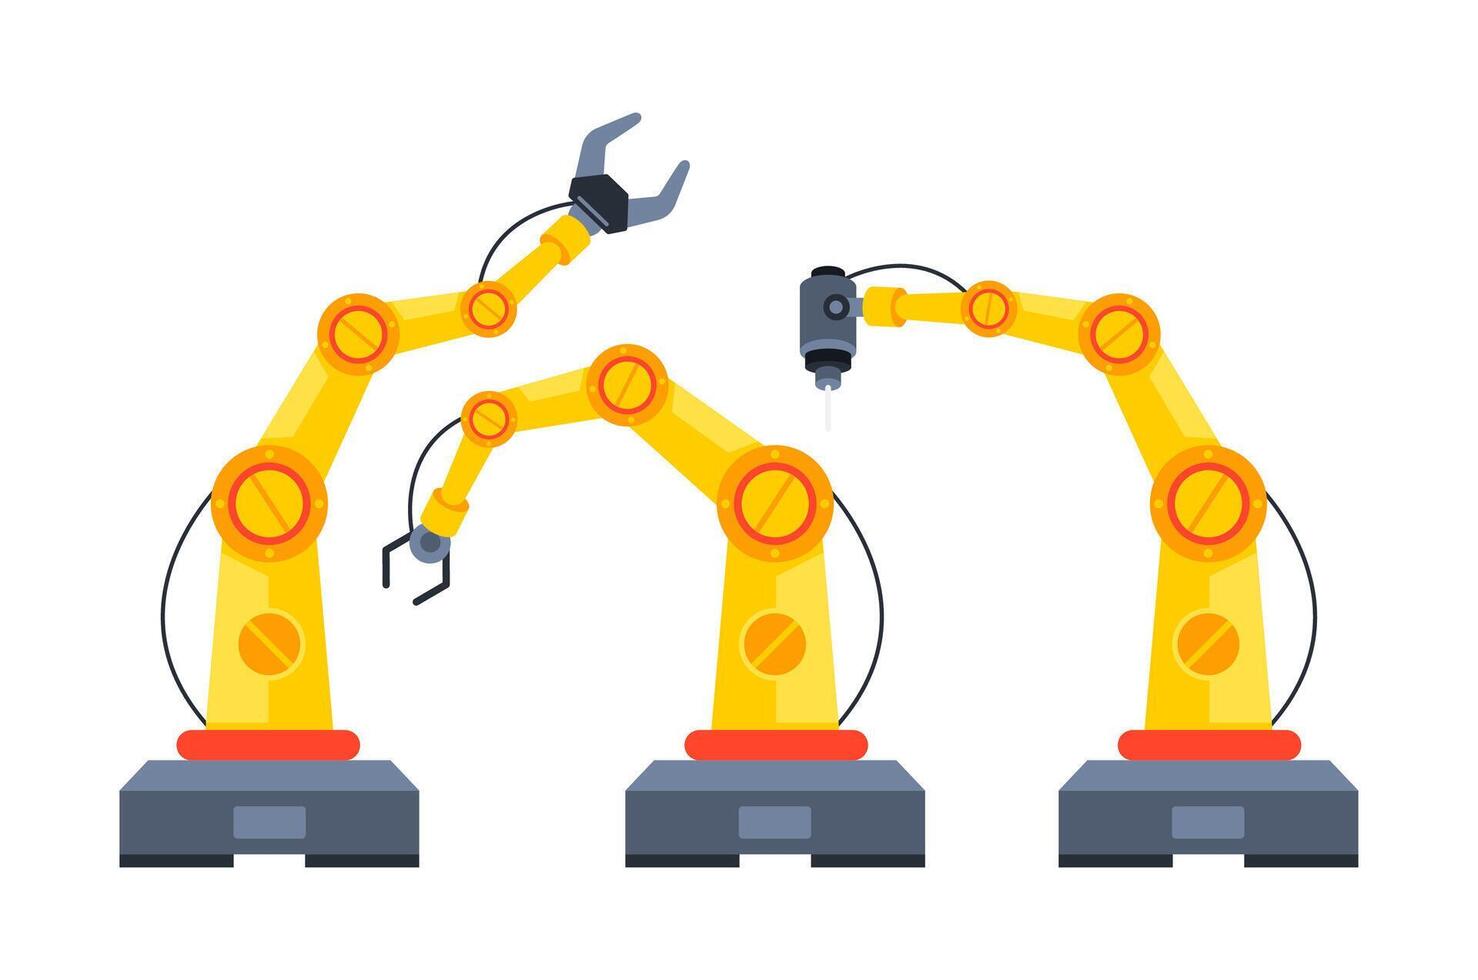 Robotic arms. Manufacturing automation technology. Robot arms or hands. Smart factory industry 4.0. Vector illustration